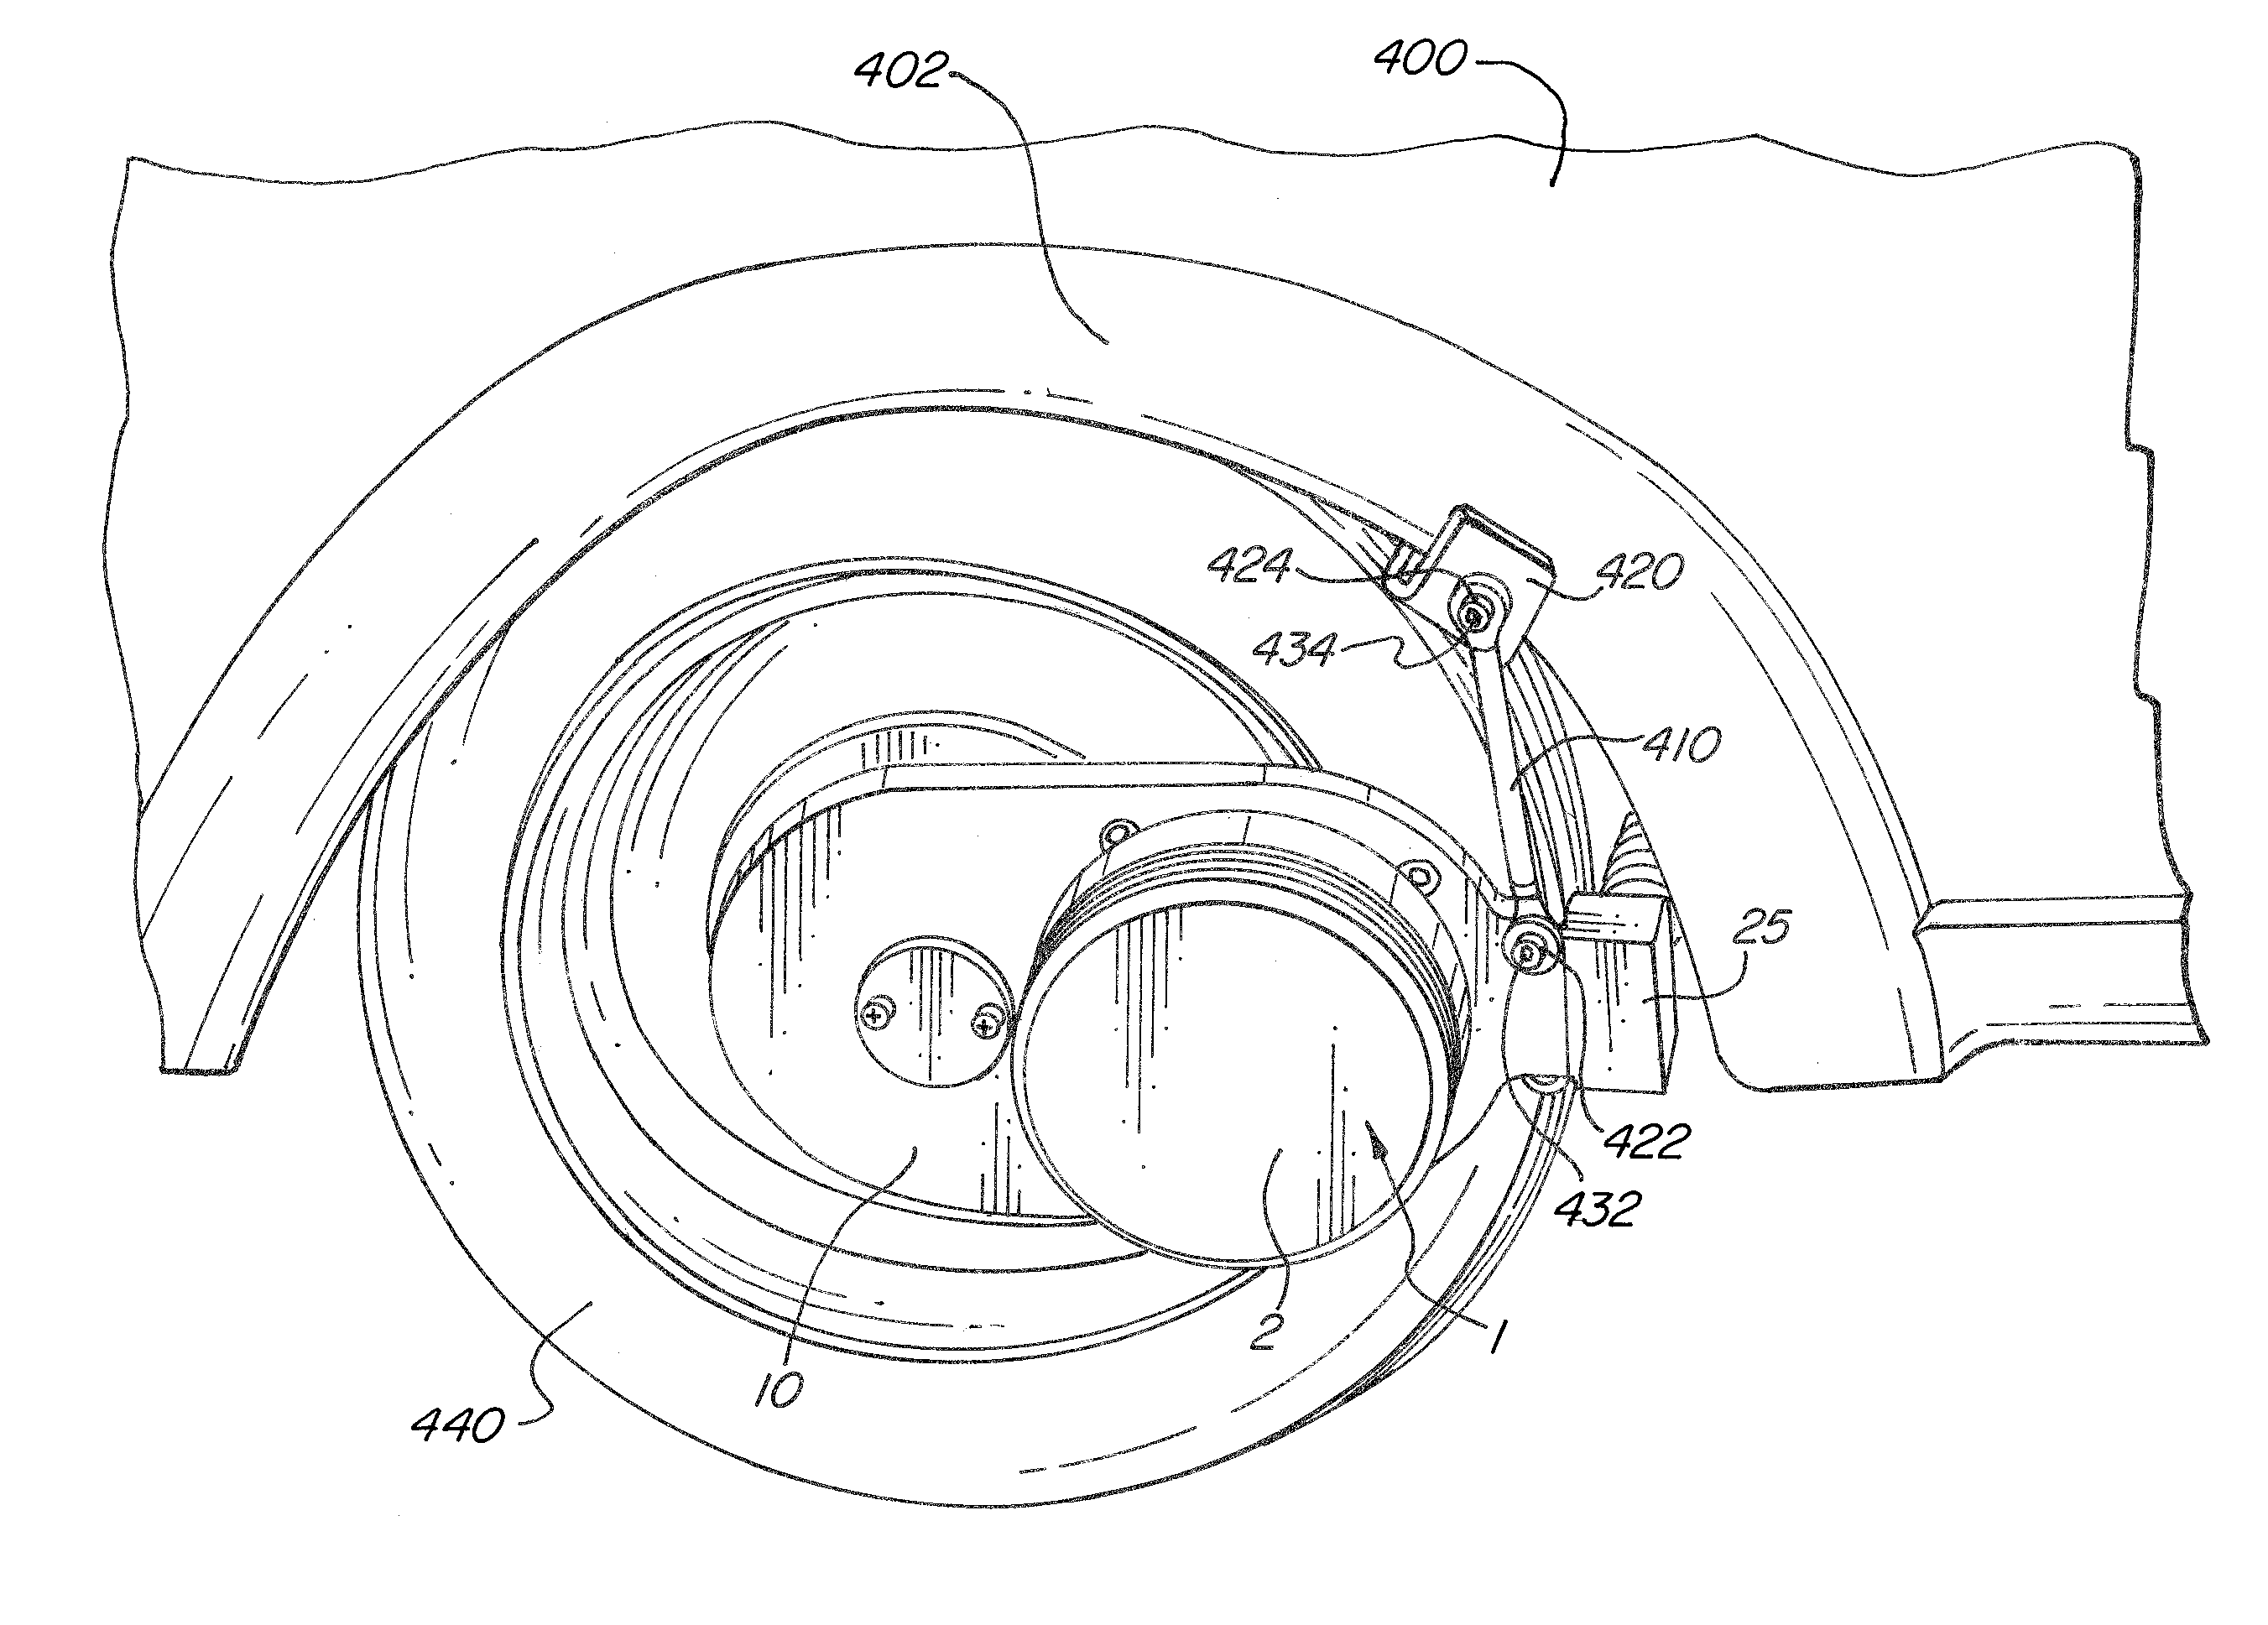 Hybrid vehicle system with indirect drive